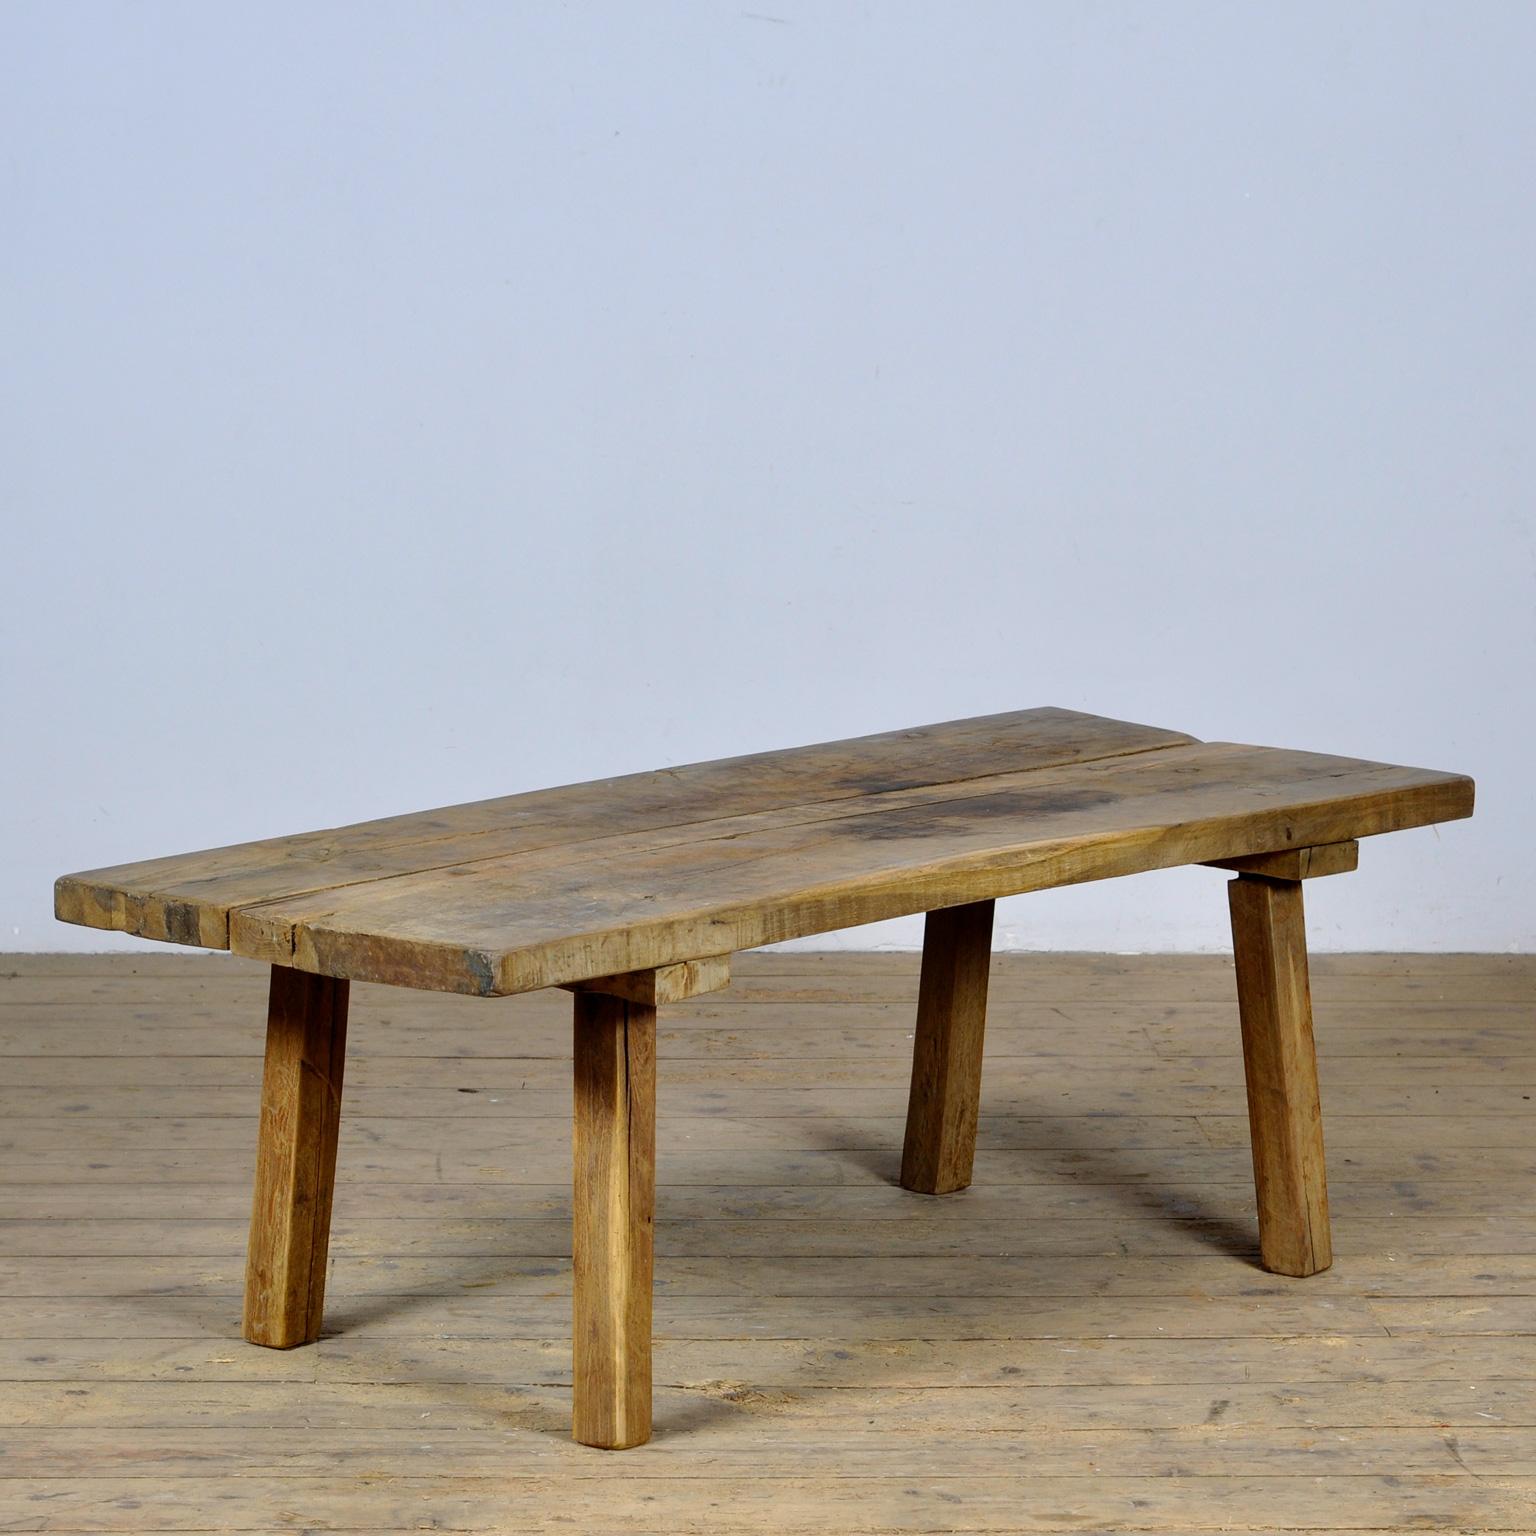 This oak butcher's farm table was produced in hungary around the 1920s. With an oak top of 5 cm thick. The legs are shortened to the ideal height for a coffee table or bench. Treated for woodworm. 